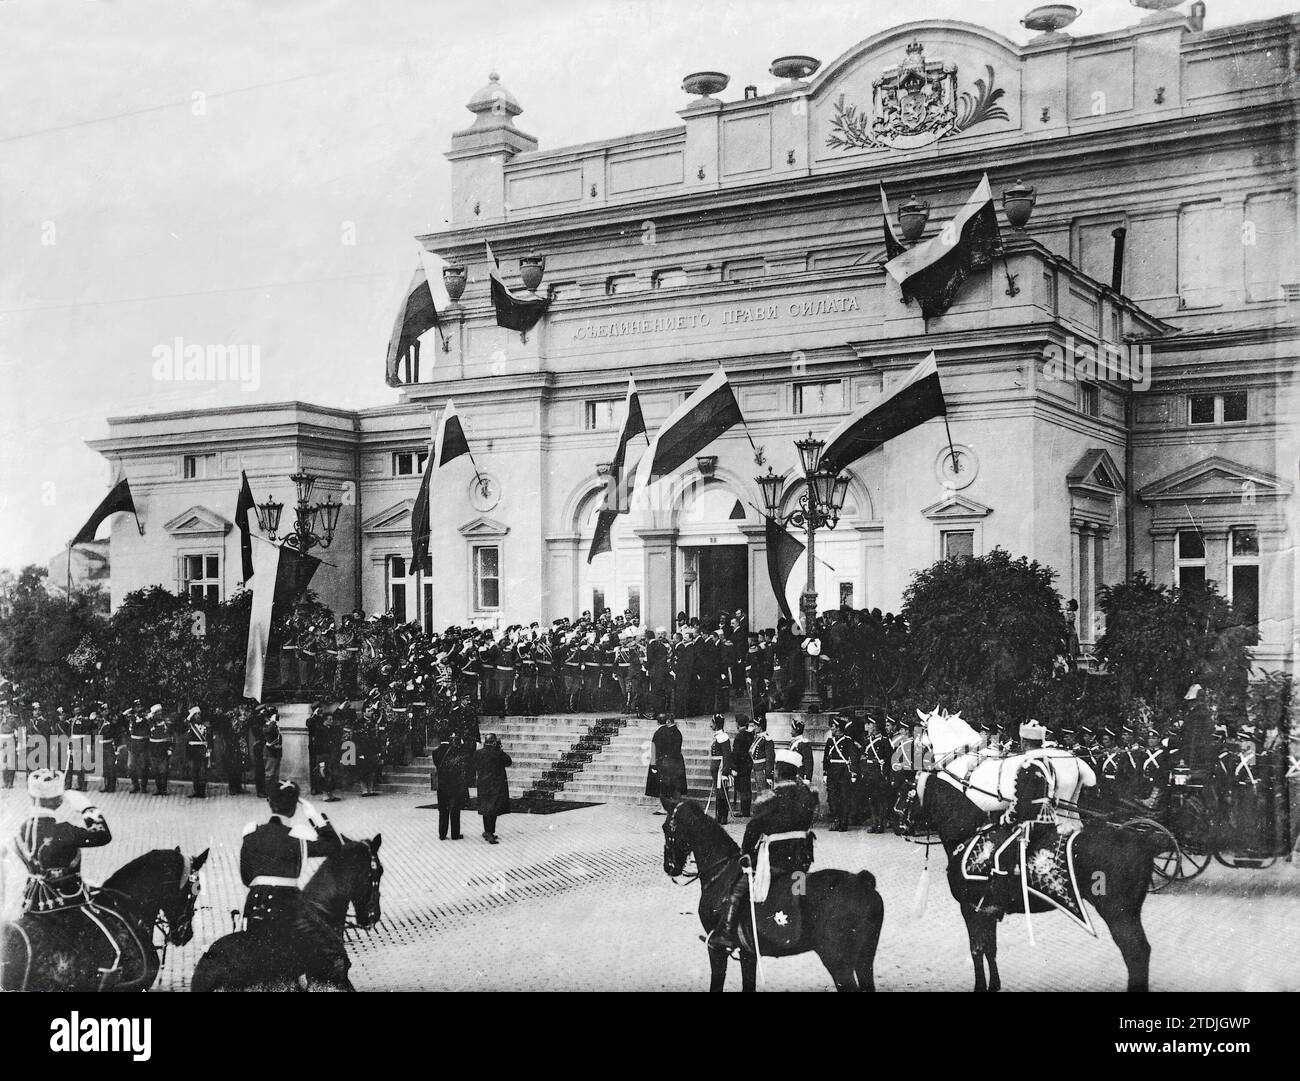 09/30/1912. Crisis in the Balkans. Exterior appearance of the Bulgarian parliament (Sobranié), at the end of its solemn opening by Tsar Ferdinand. Credit: Album / Archivo ABC / Charles Trampus Stock Photo